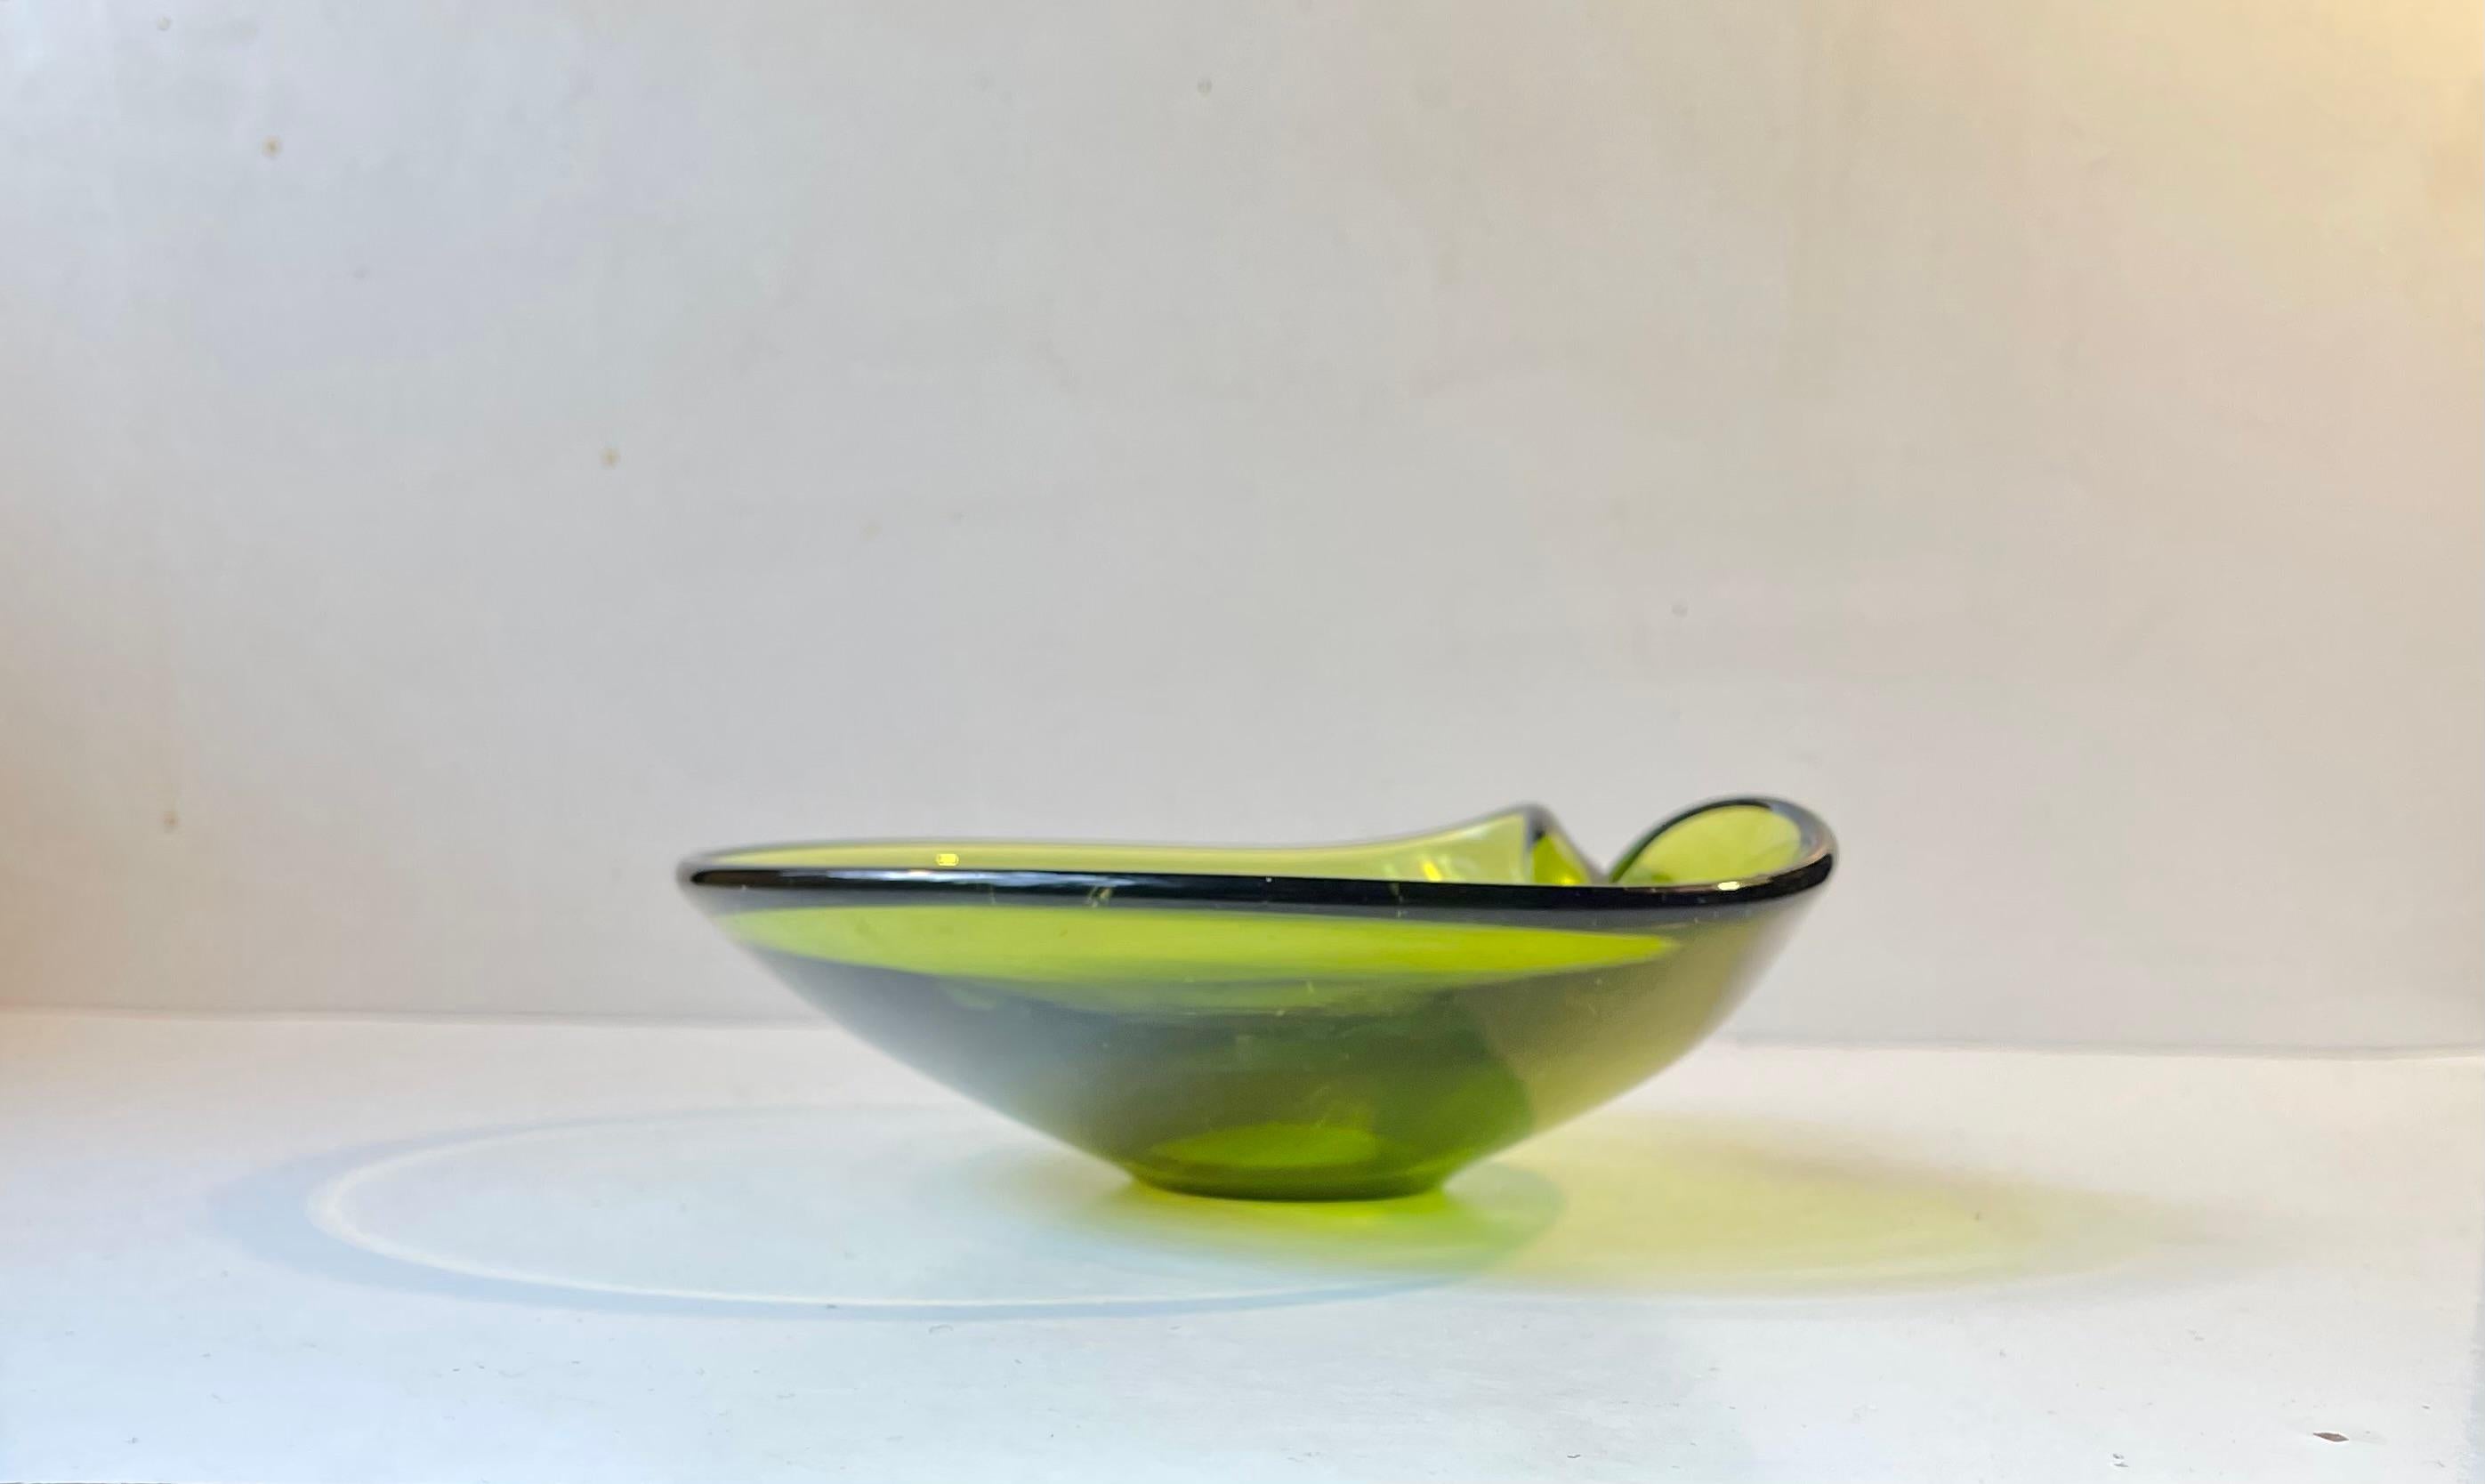 Rare handblown organically shaped dish or small bowl - 17270 designed by Per Lütken. Manufactured at Holmegaard in Denmark during the mid-1950s. It is called May Green and it is signed and numbered by the designer. Measurements: D: 21 cm, H: 7 cm.